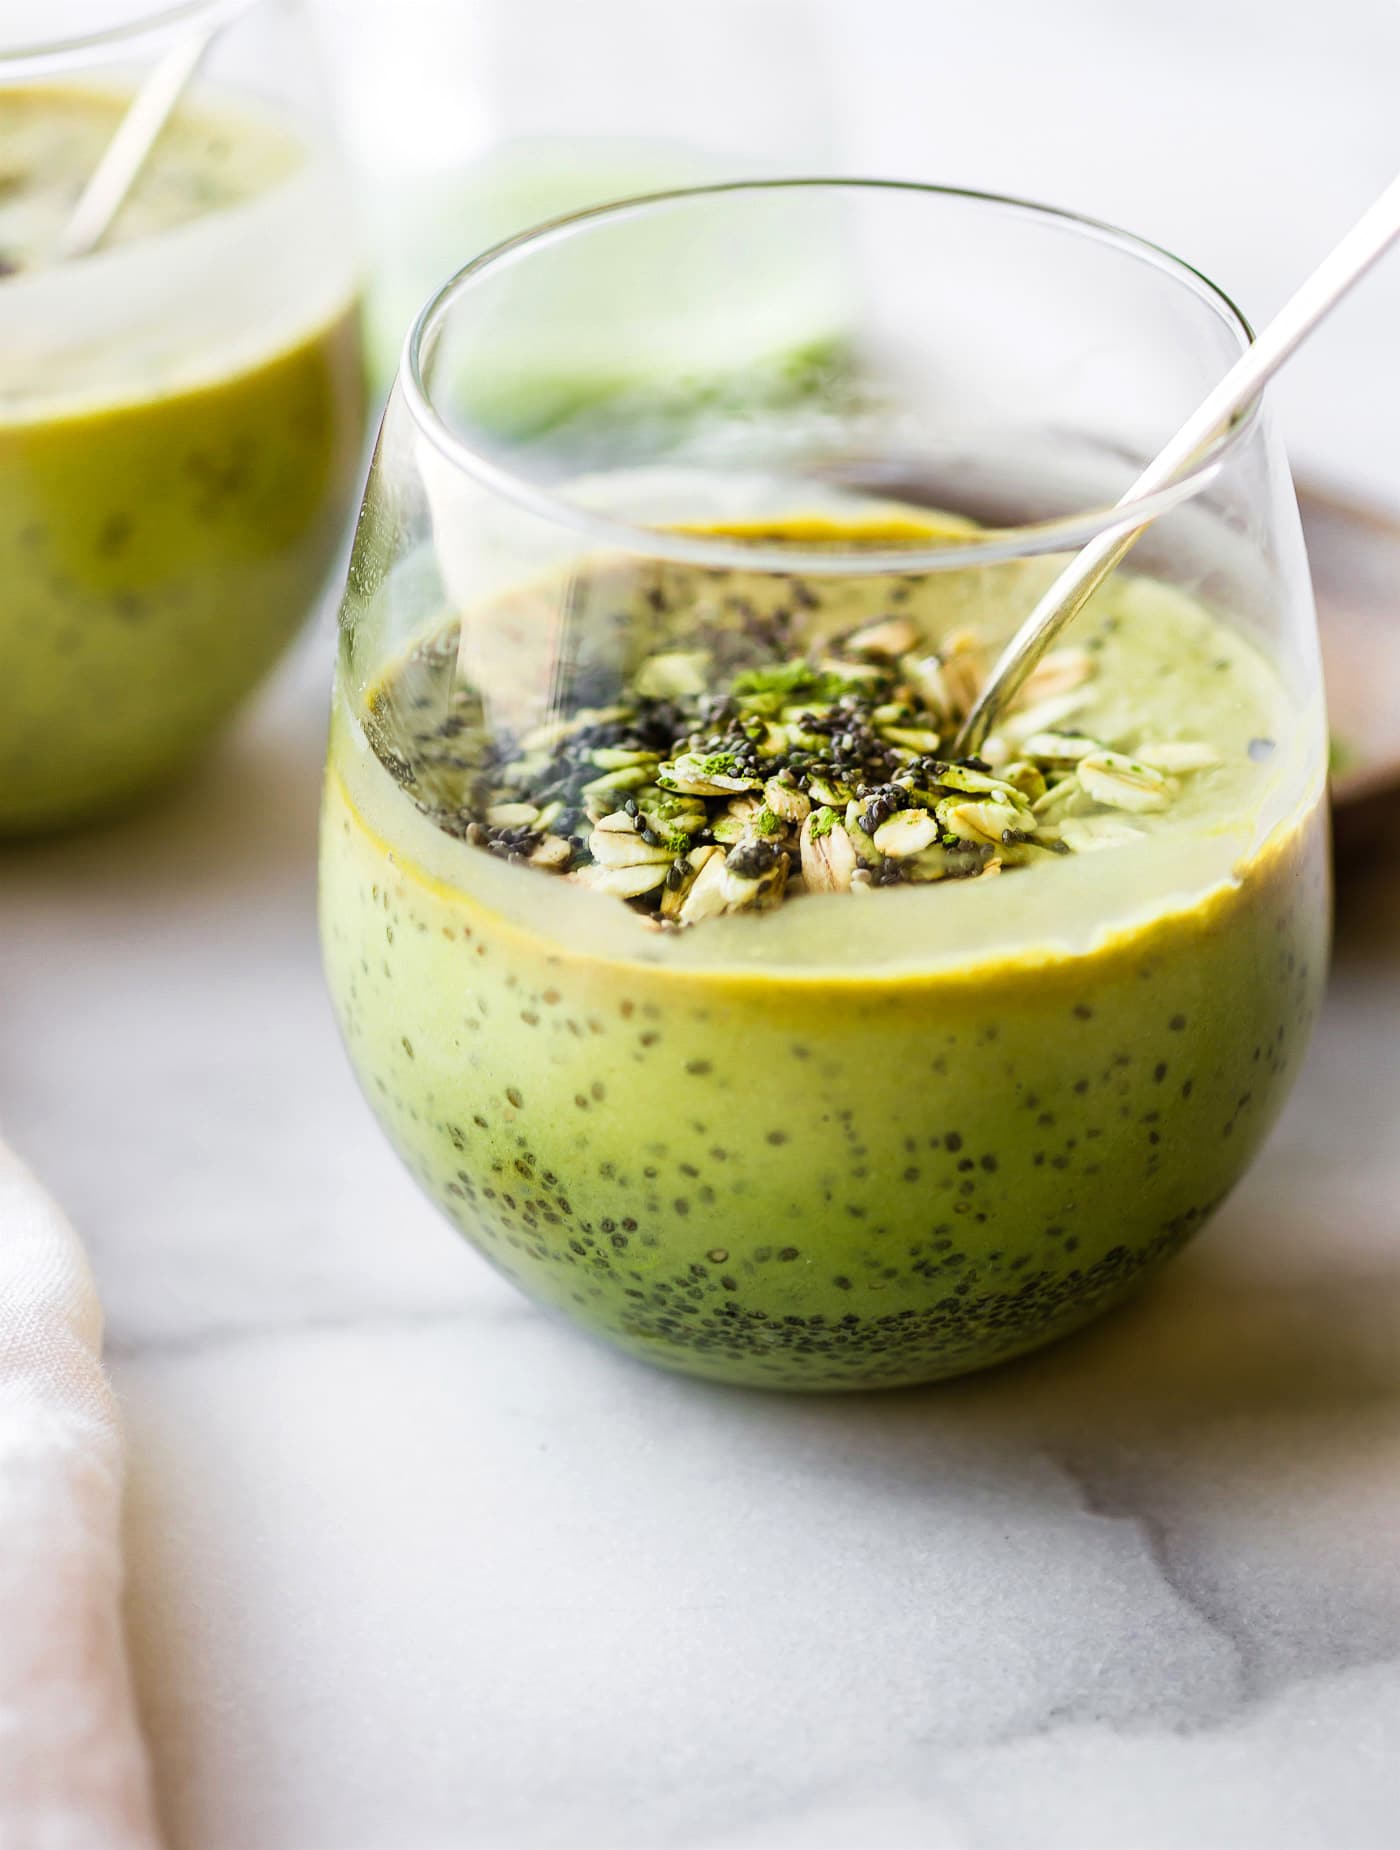 This Chia Matcha Overnight Breakfast Smoothie is a great way to start the day! An energizing Make ahead smoothie packed with antioxidants, fiber, and probiotics! Just blend it up that green goodness the night before and enjoy the next morning.